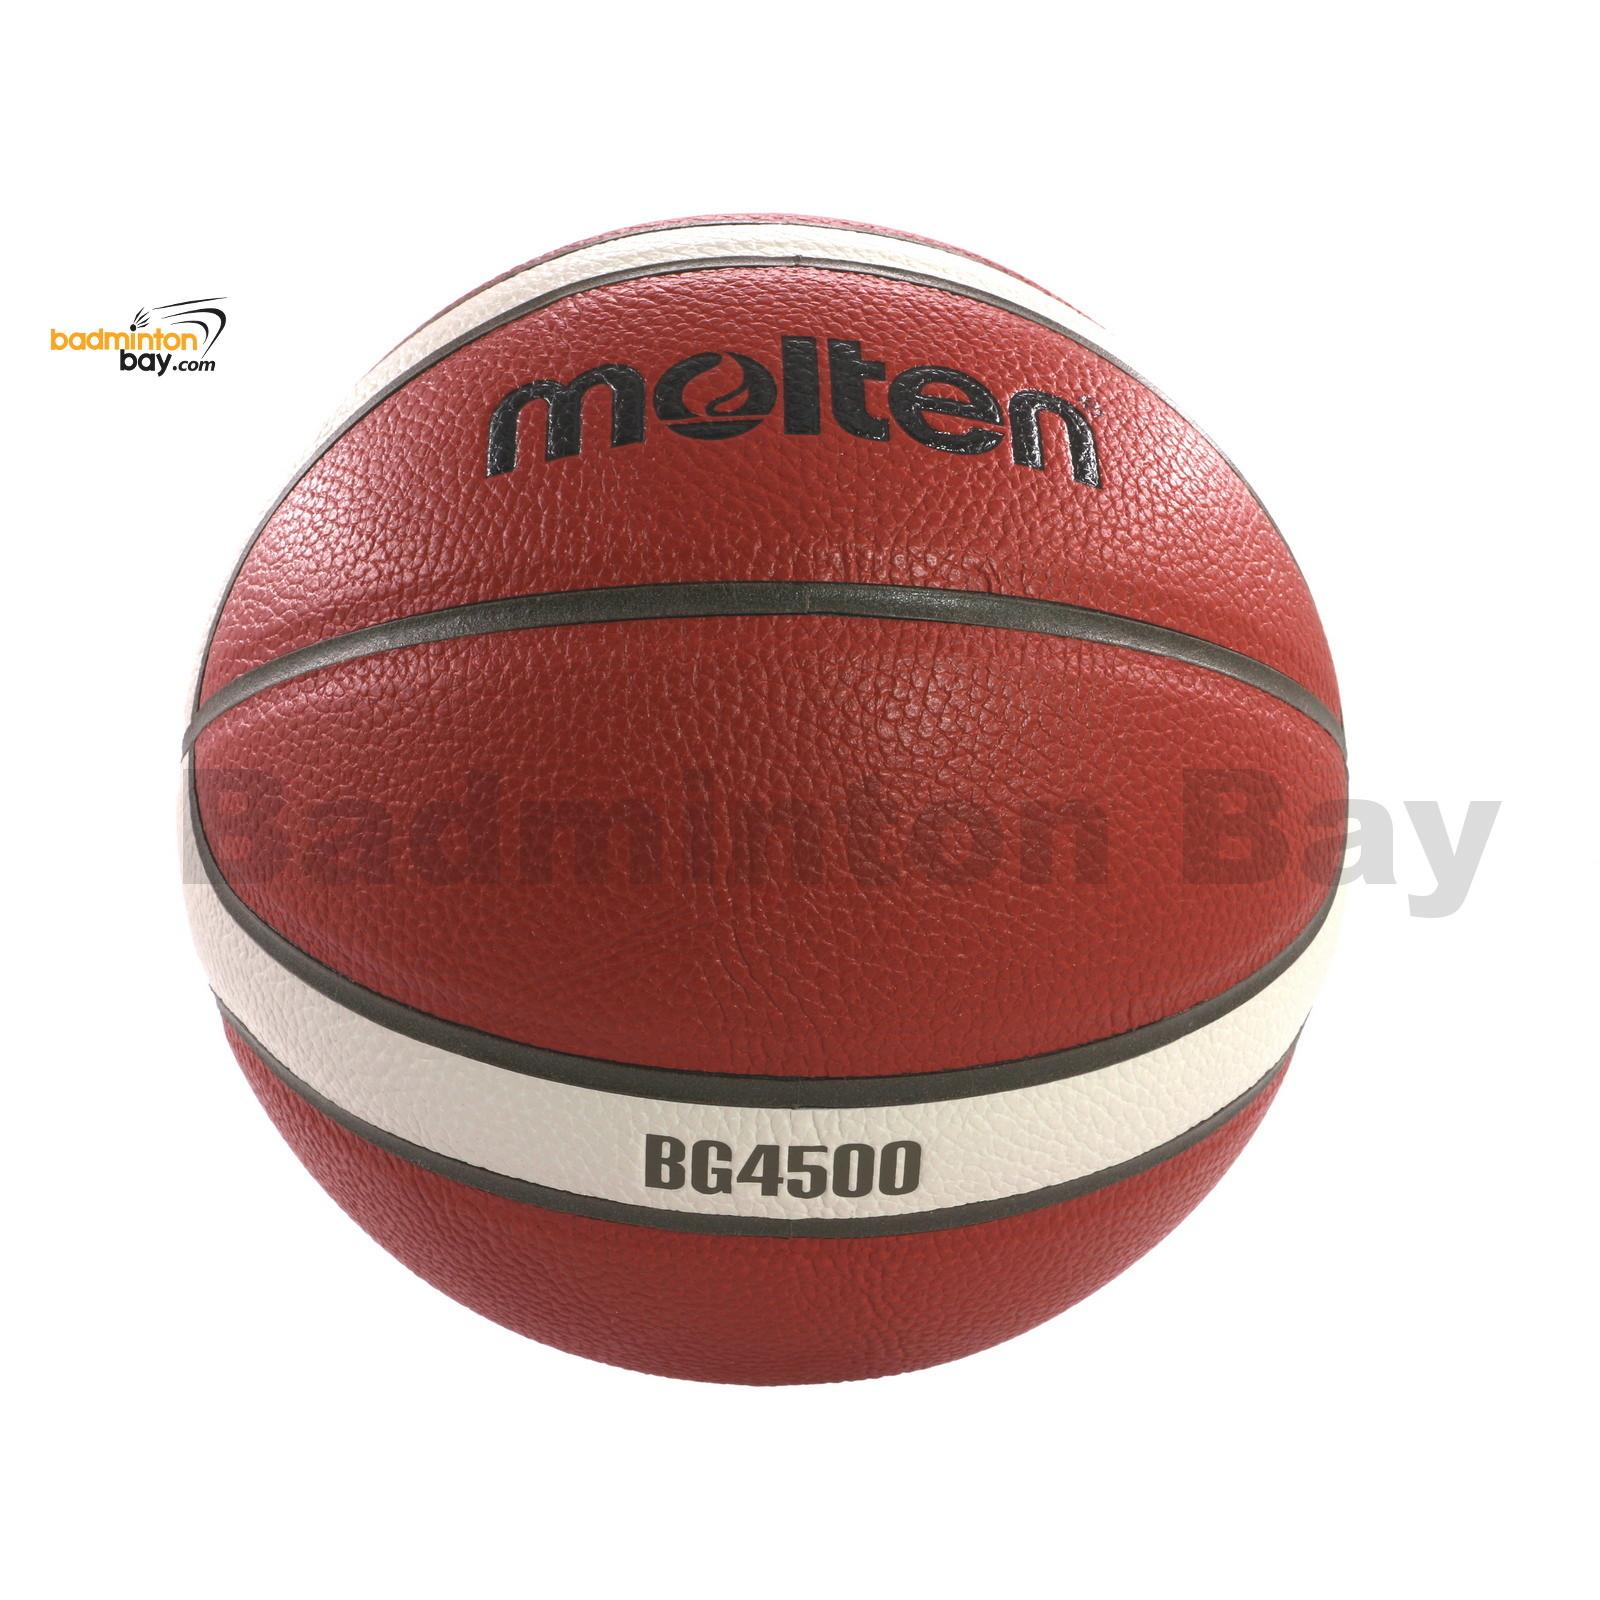 Indoor Play Orange/Ivory FIBA Approved Molten BG3800 Basketball Composite Leather 